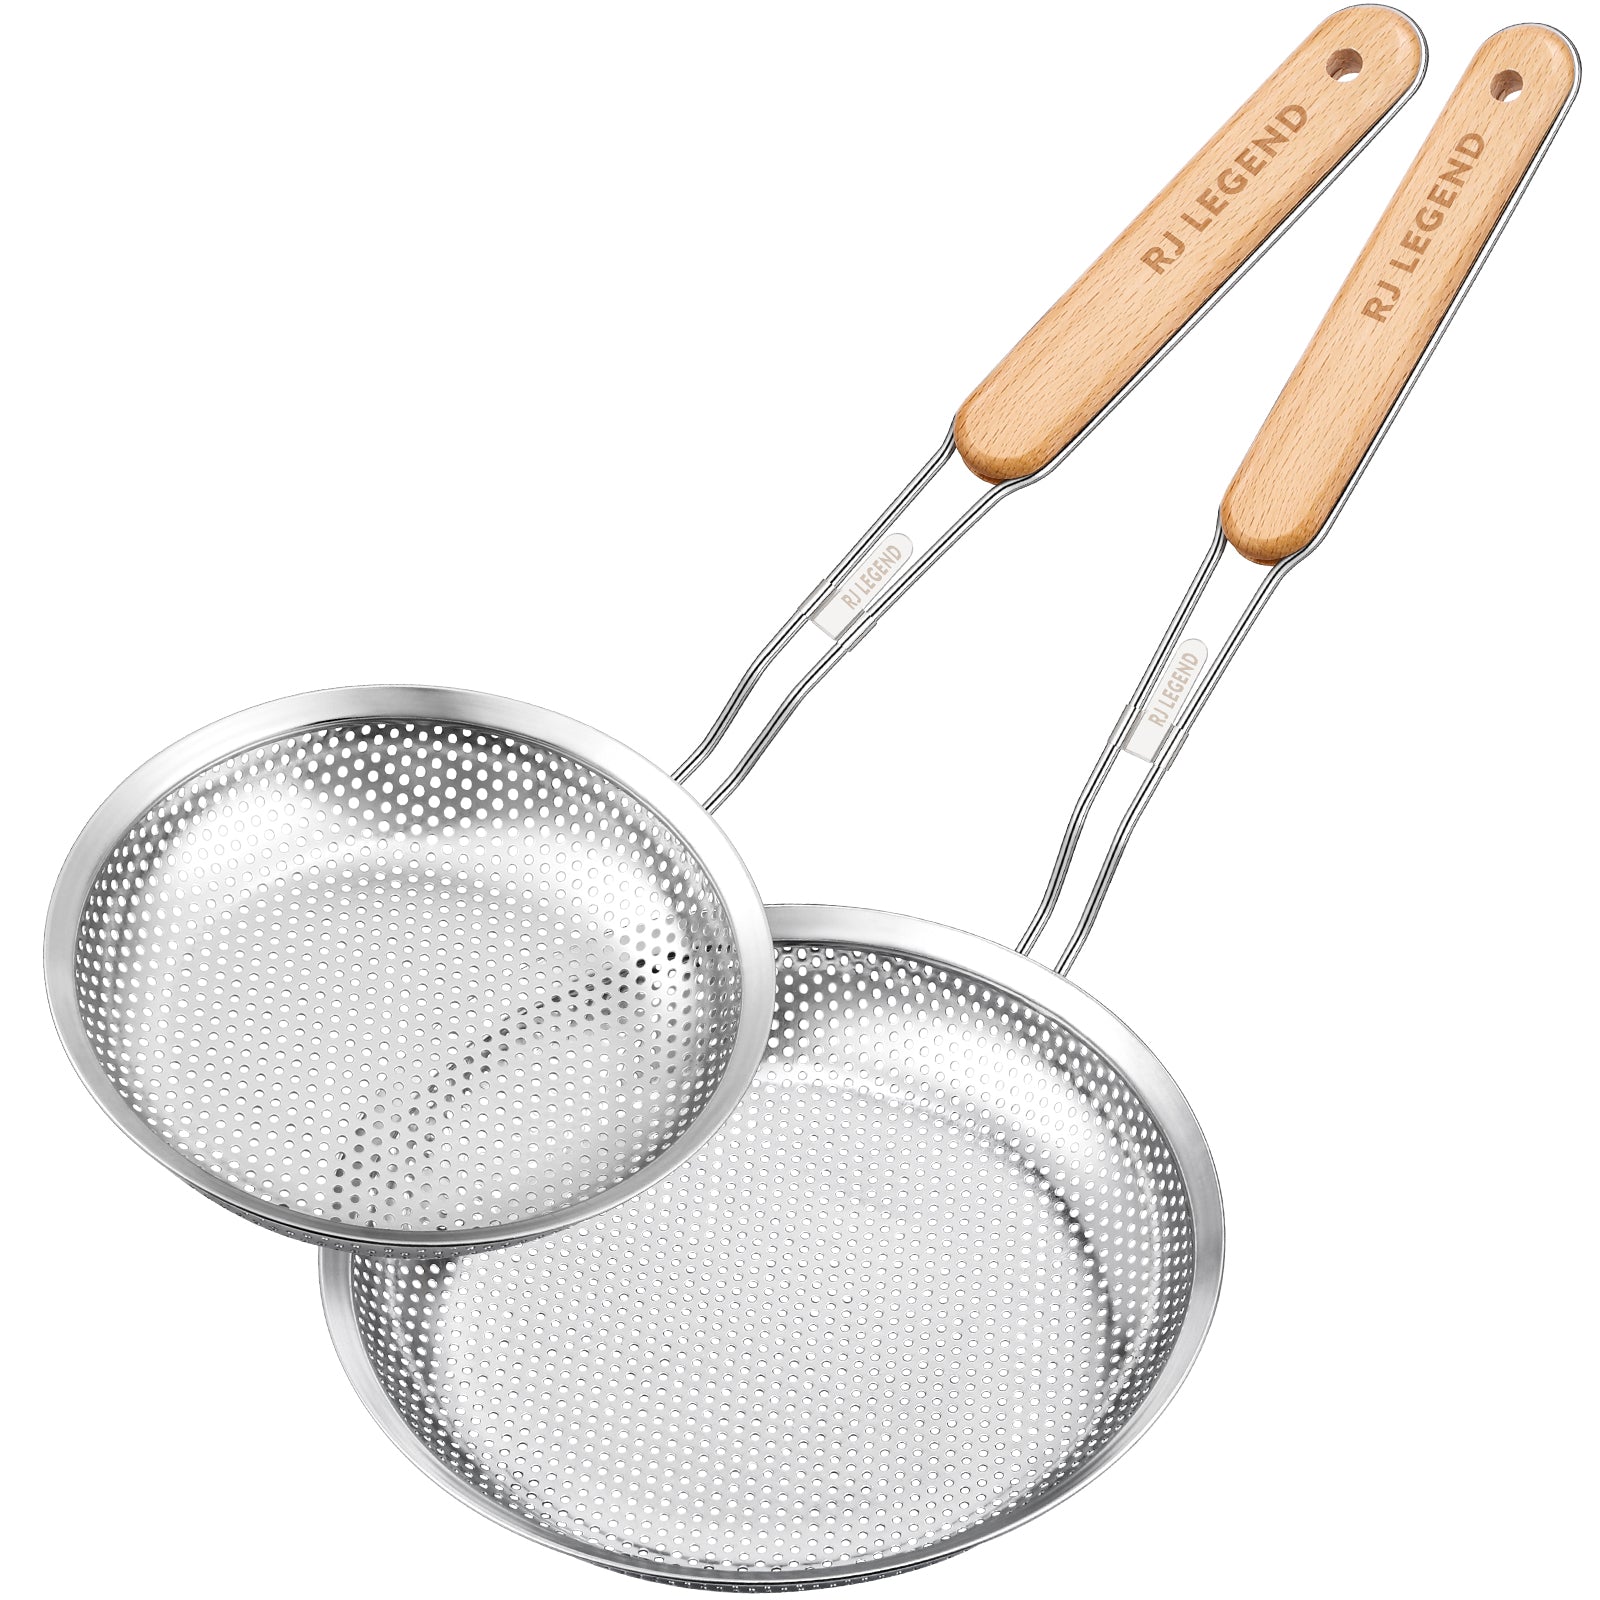 RJ Legend Stainless Steel Micro-Perforated Skimmer Strainer, Pasta Noodle Net Basket with Wooden Handle, 2 Pieces Kitchen Utensil Set - 6.4-inch and 8